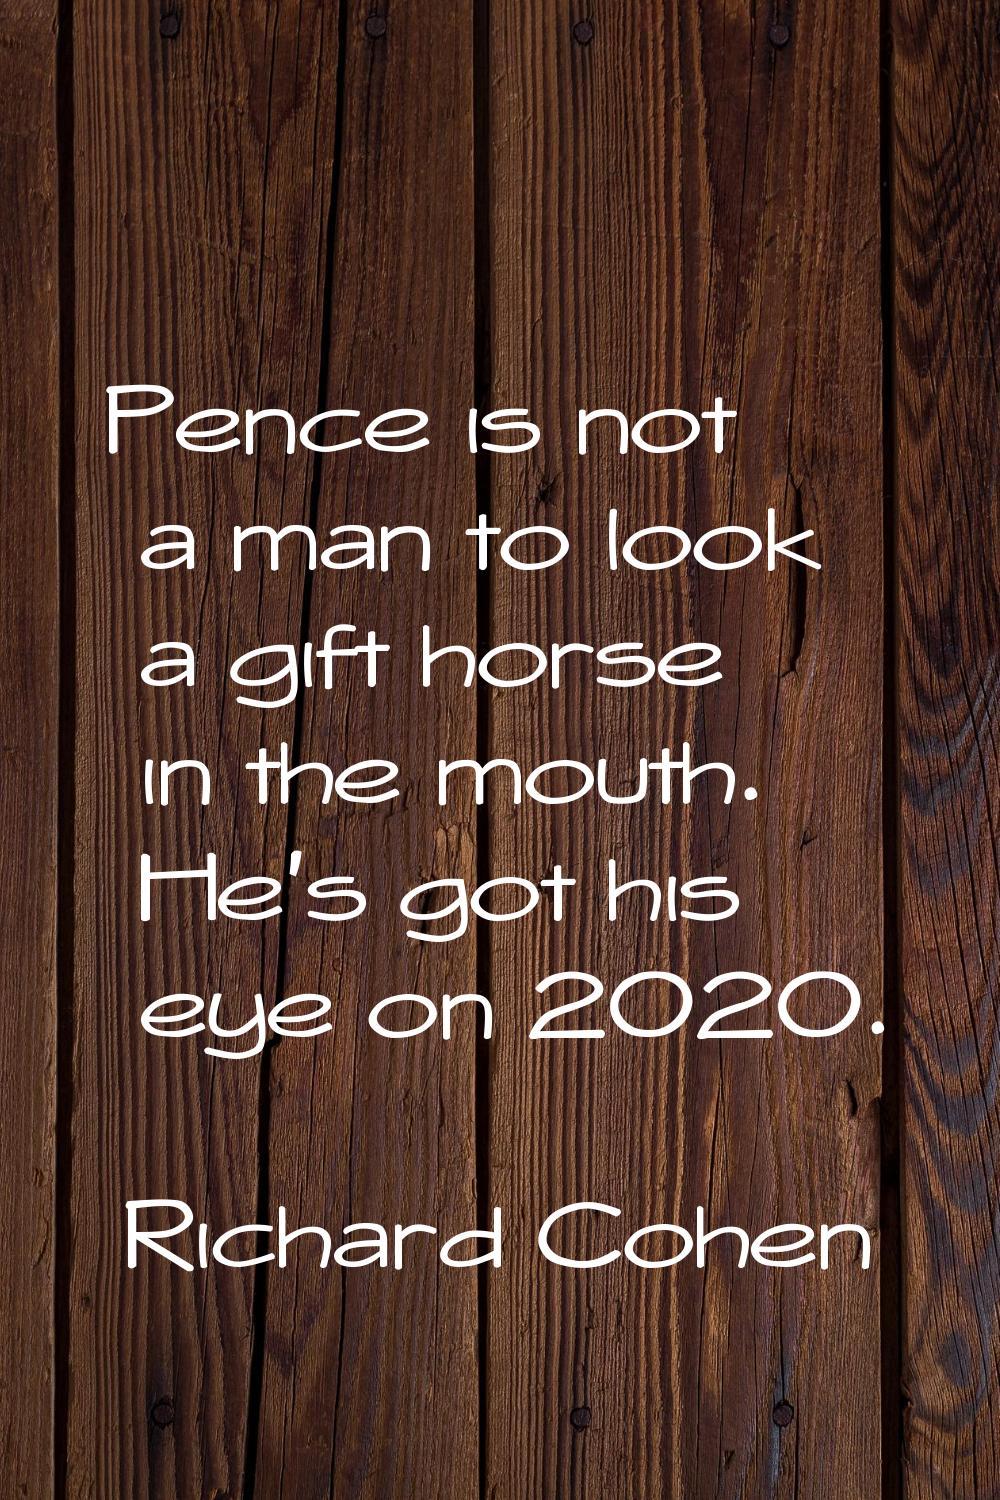 Pence is not a man to look a gift horse in the mouth. He's got his eye on 2020.